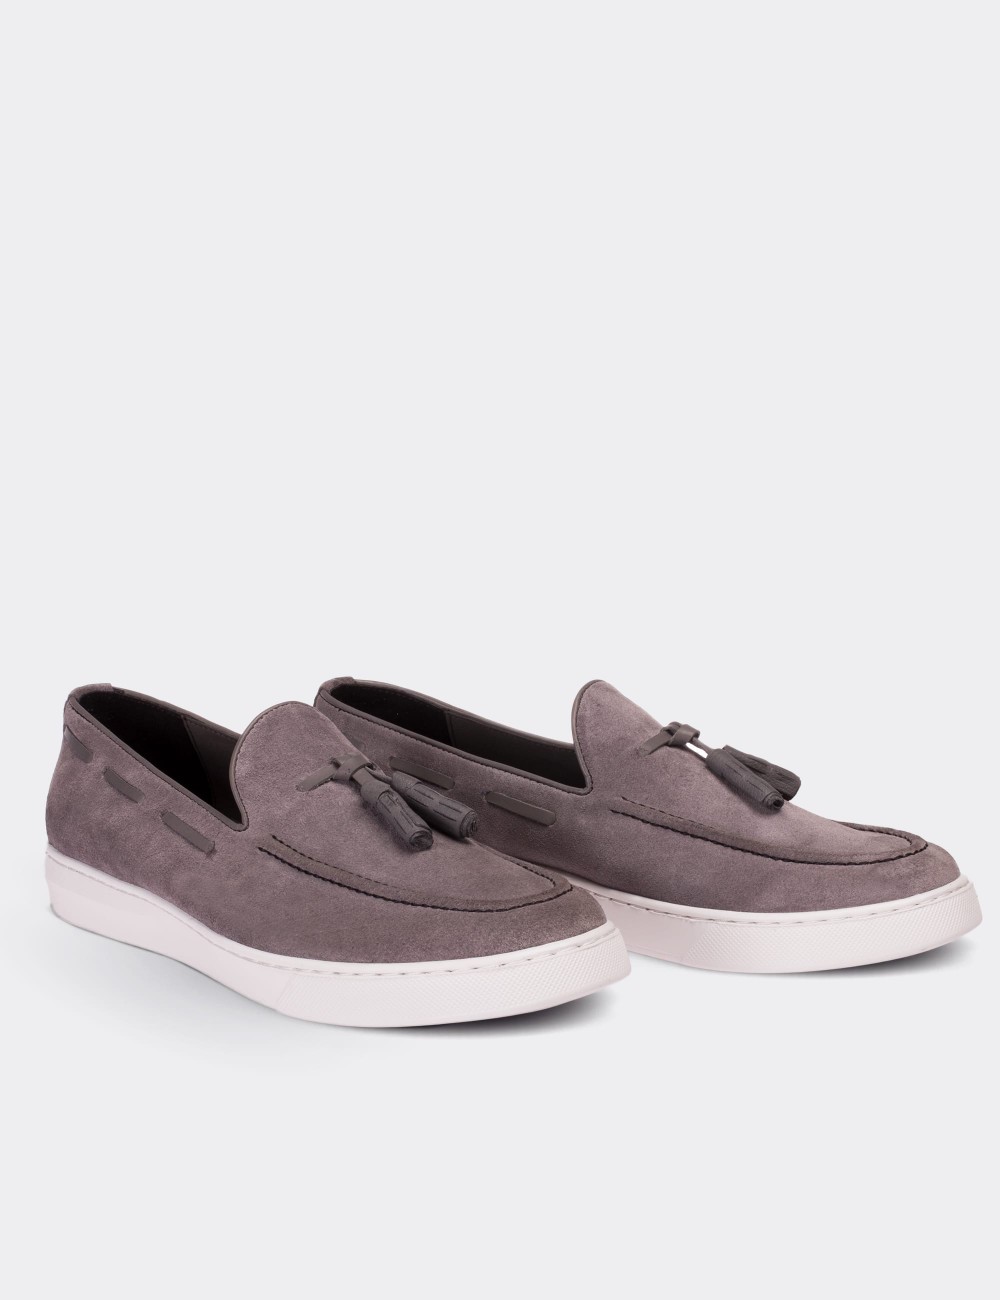 Gray Suede Leather Loafers - 01713MGRIP01